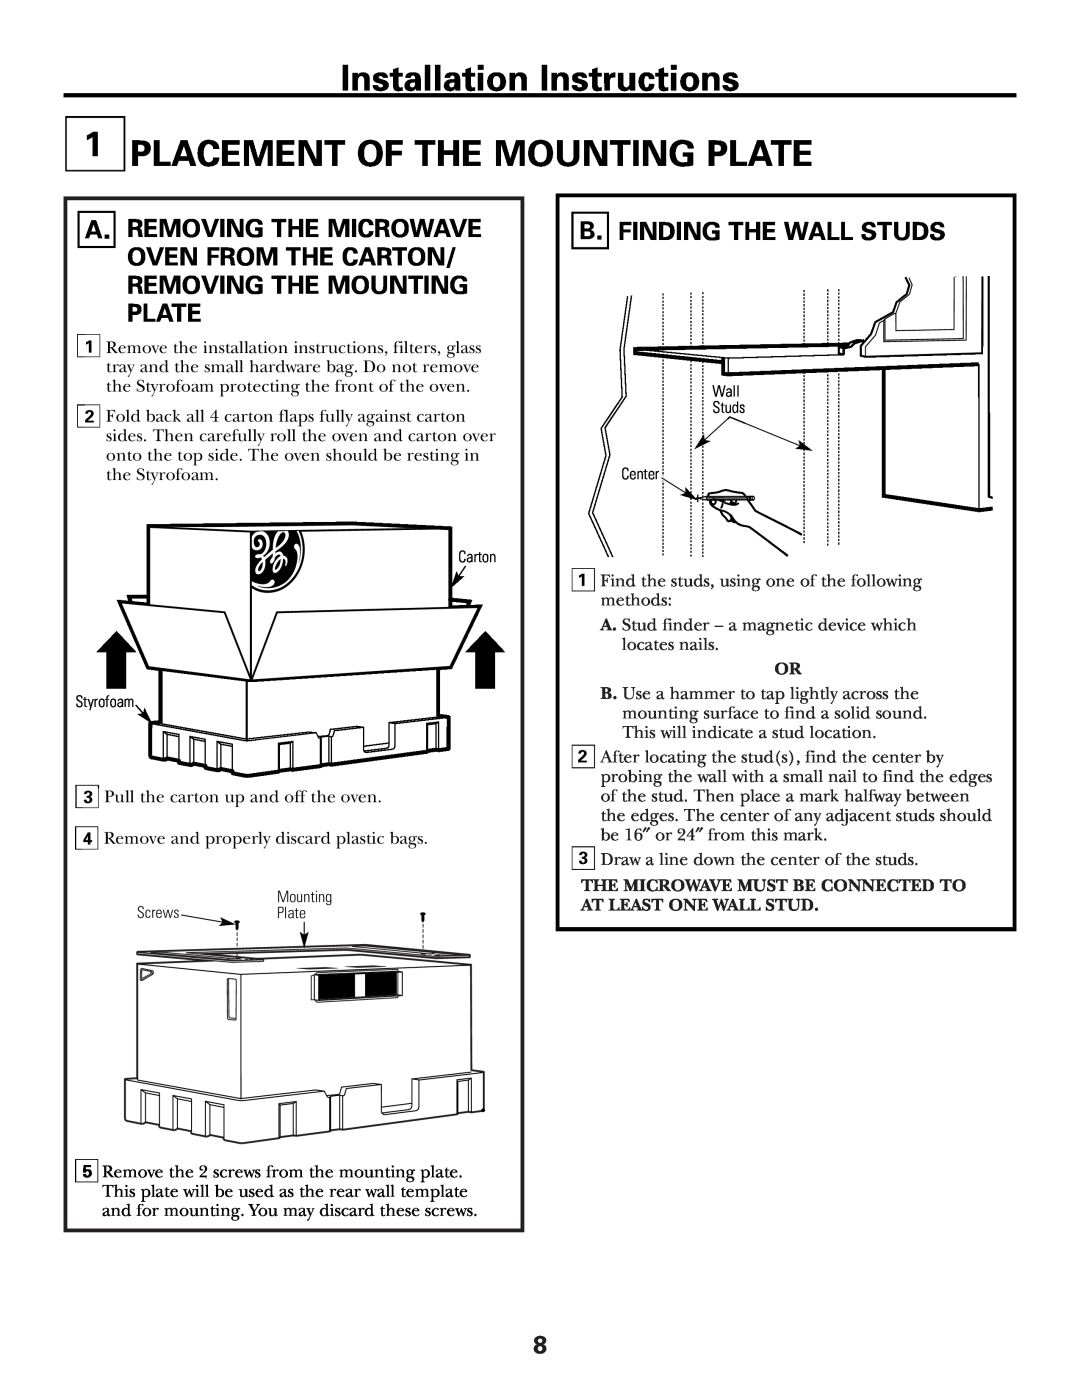 GE CVM2072 warranty Installation Instructions 1 PLACEMENT OF THE MOUNTING PLATE, B. Finding The Wall Studs 